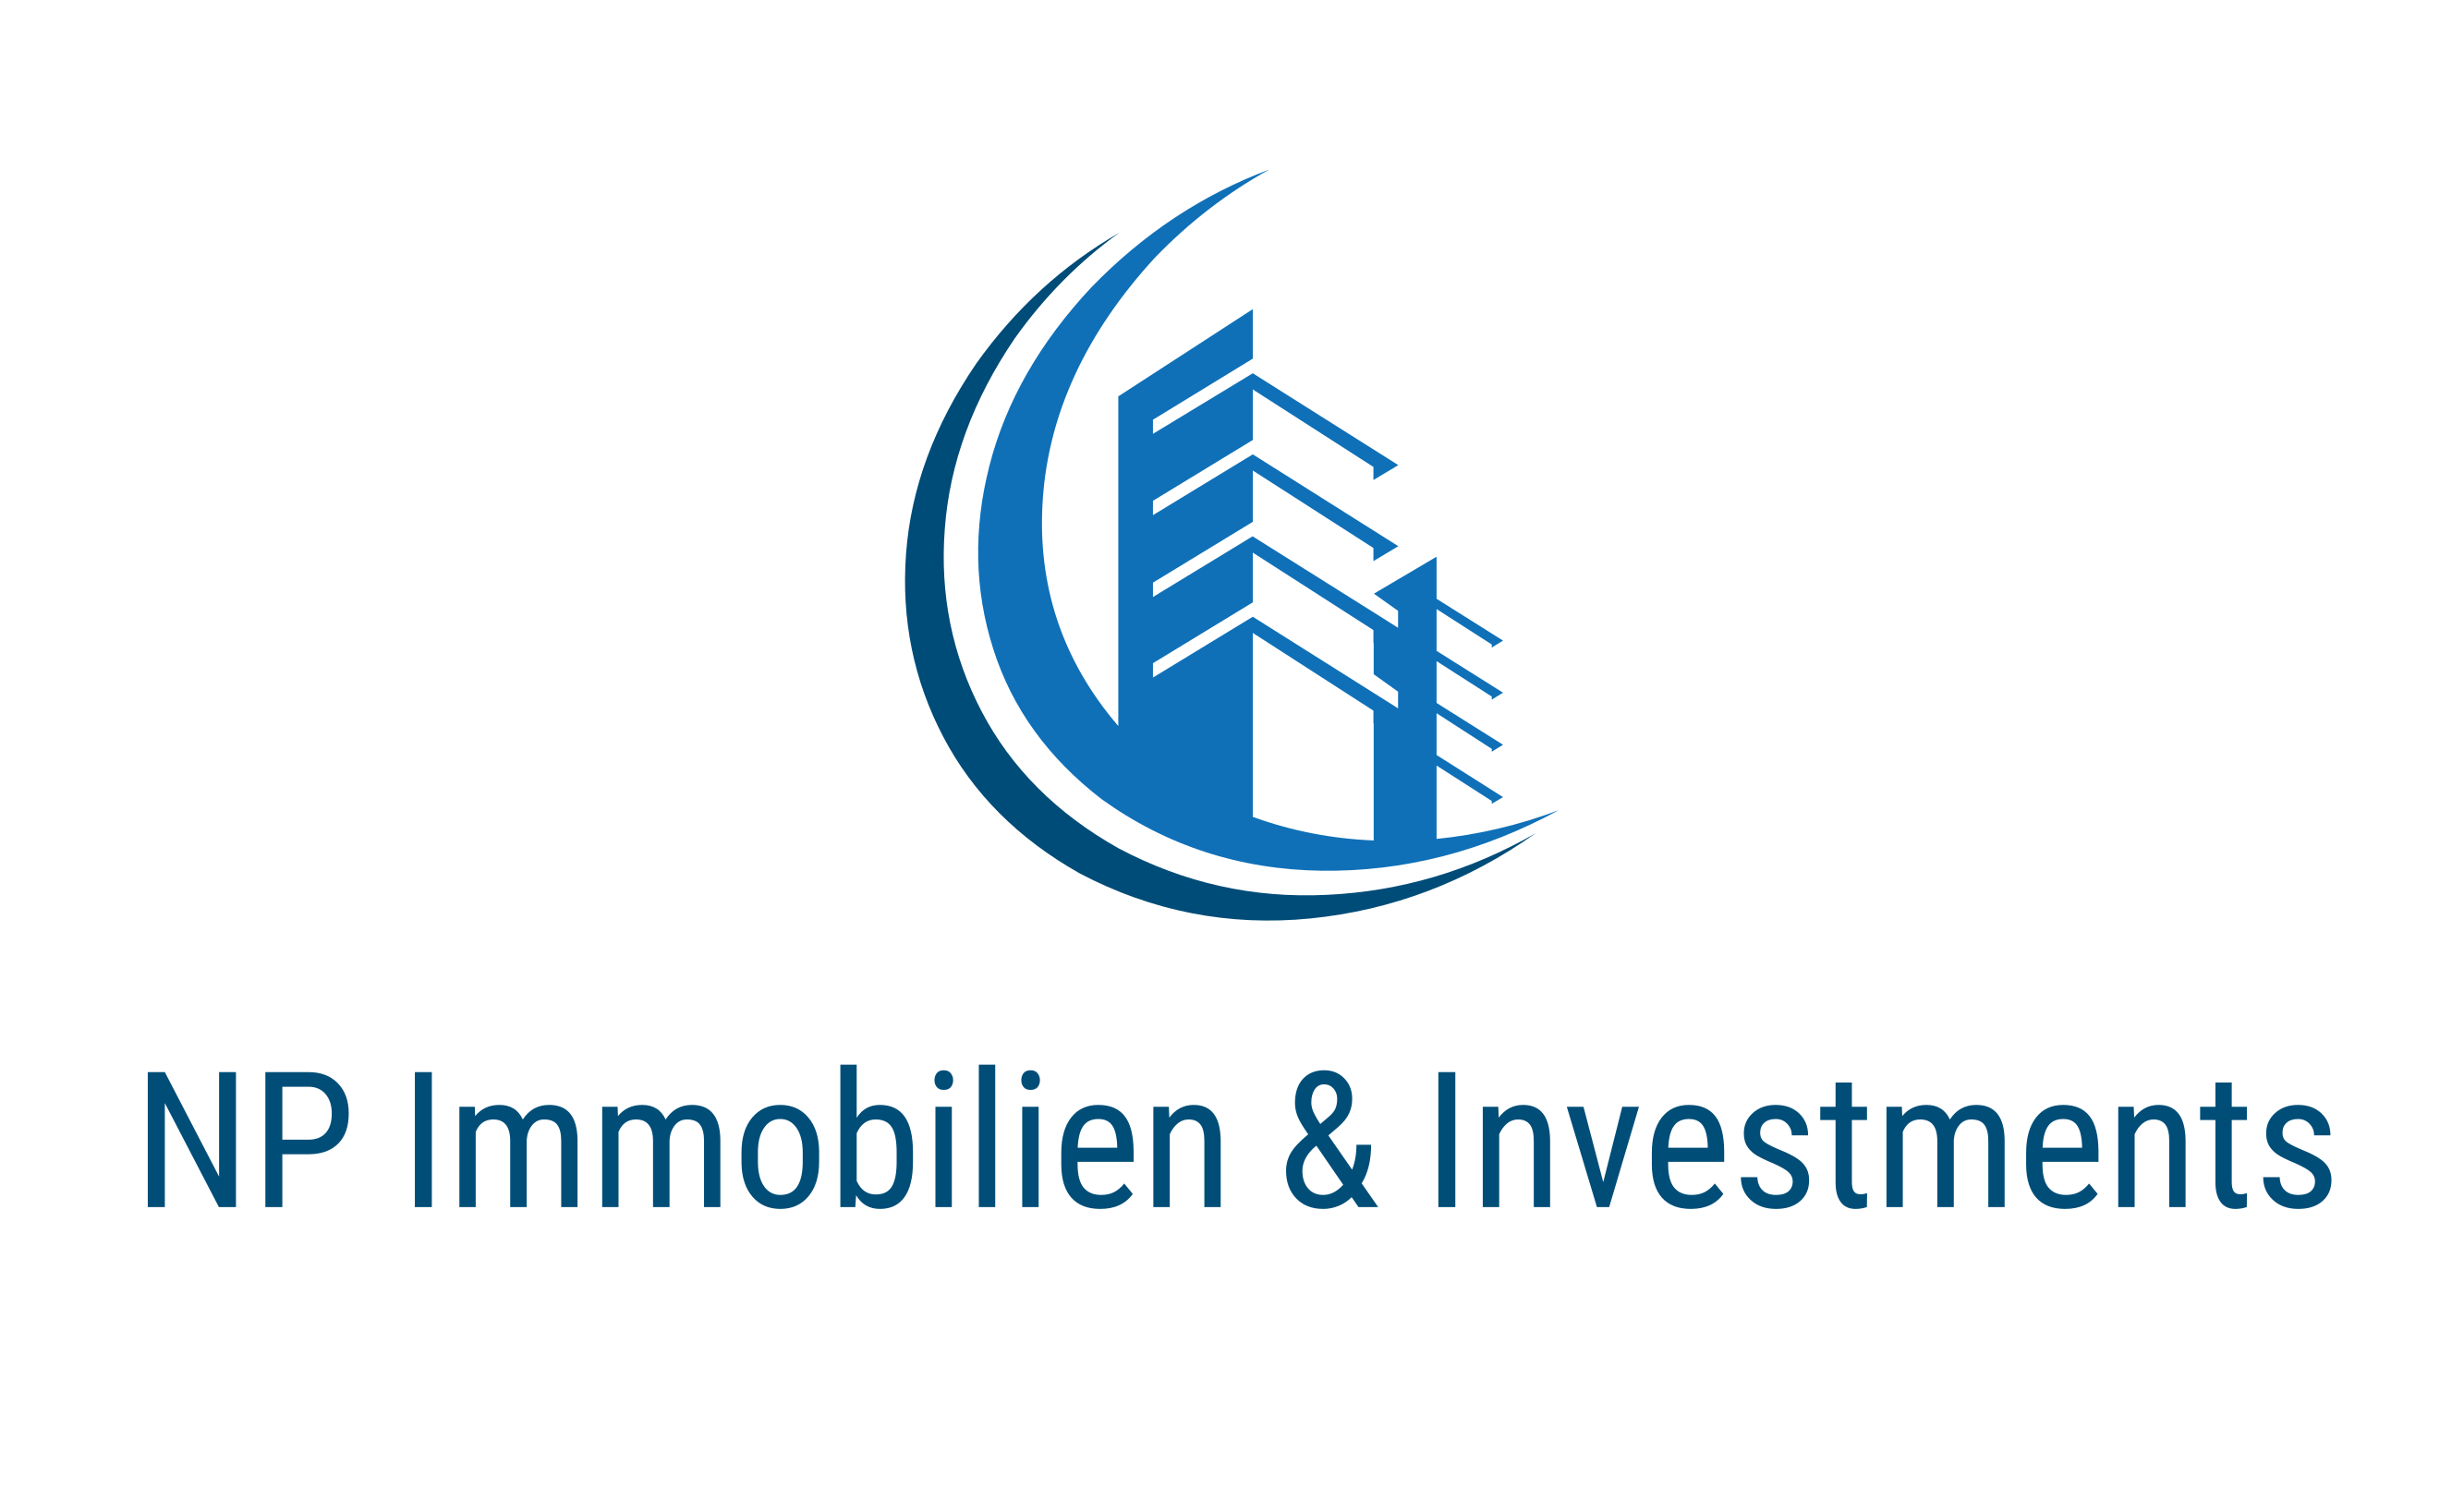 NP Immobilien & Investments GmbH